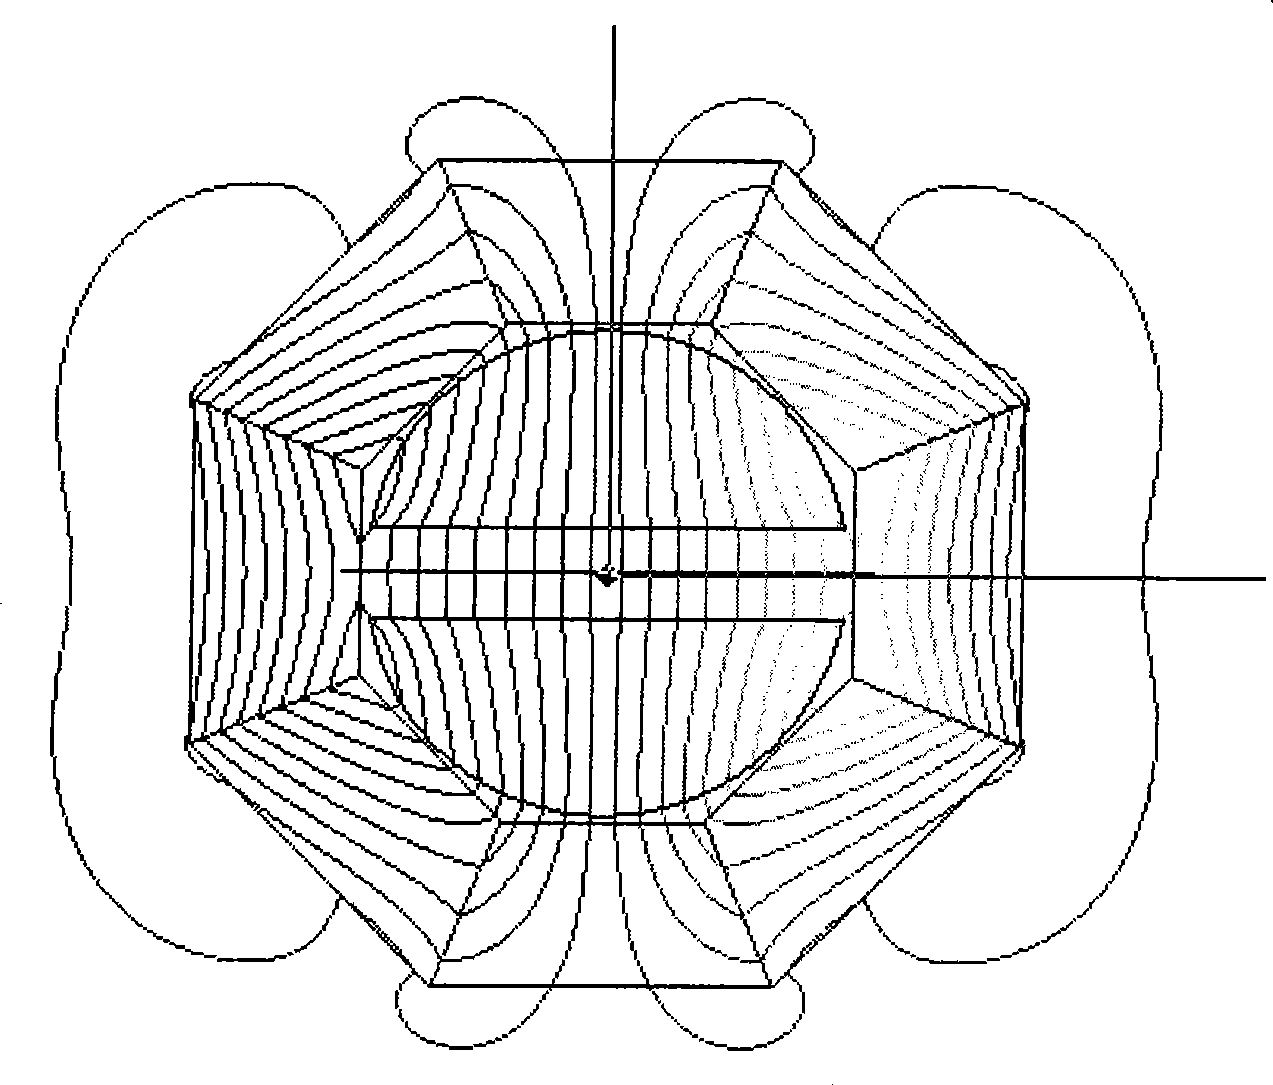 Permanent magnetism body system for rotary magnetic refrigeration